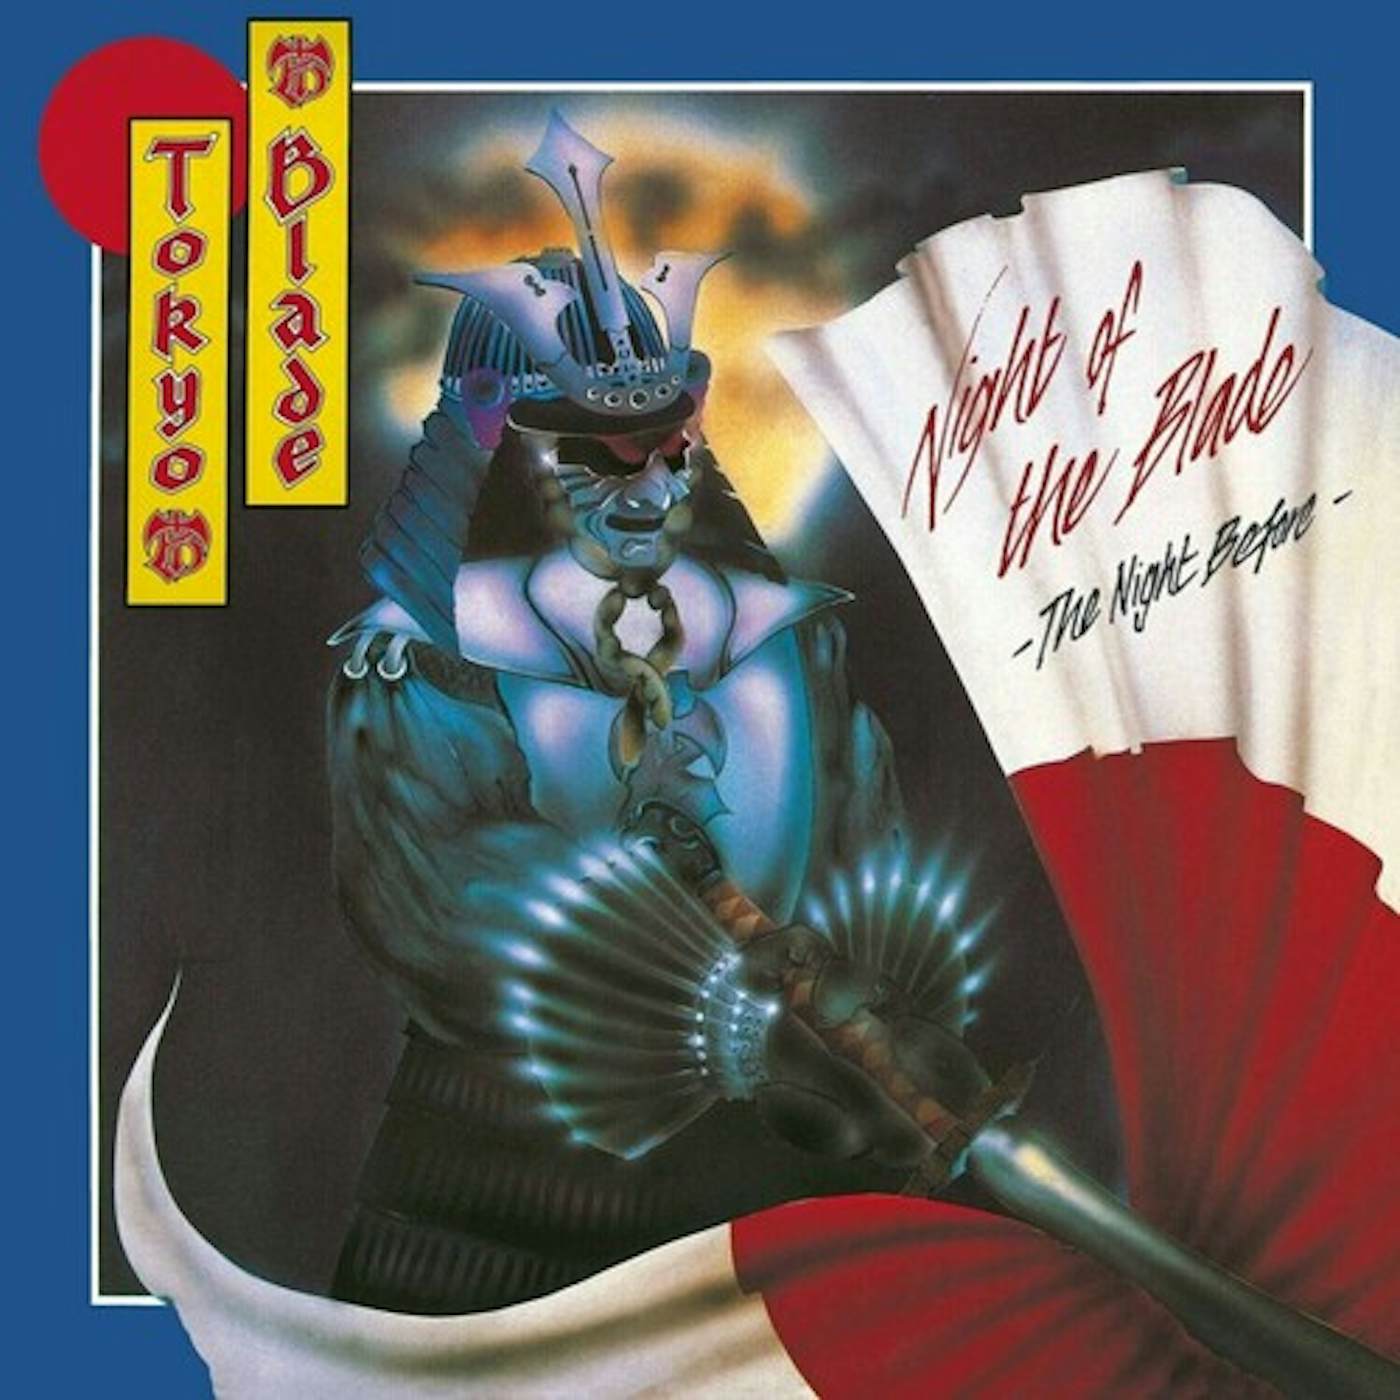 Tokyo Blade NIGHT OF THE BLADE - THE NIGHT BEFORE Vinyl Record